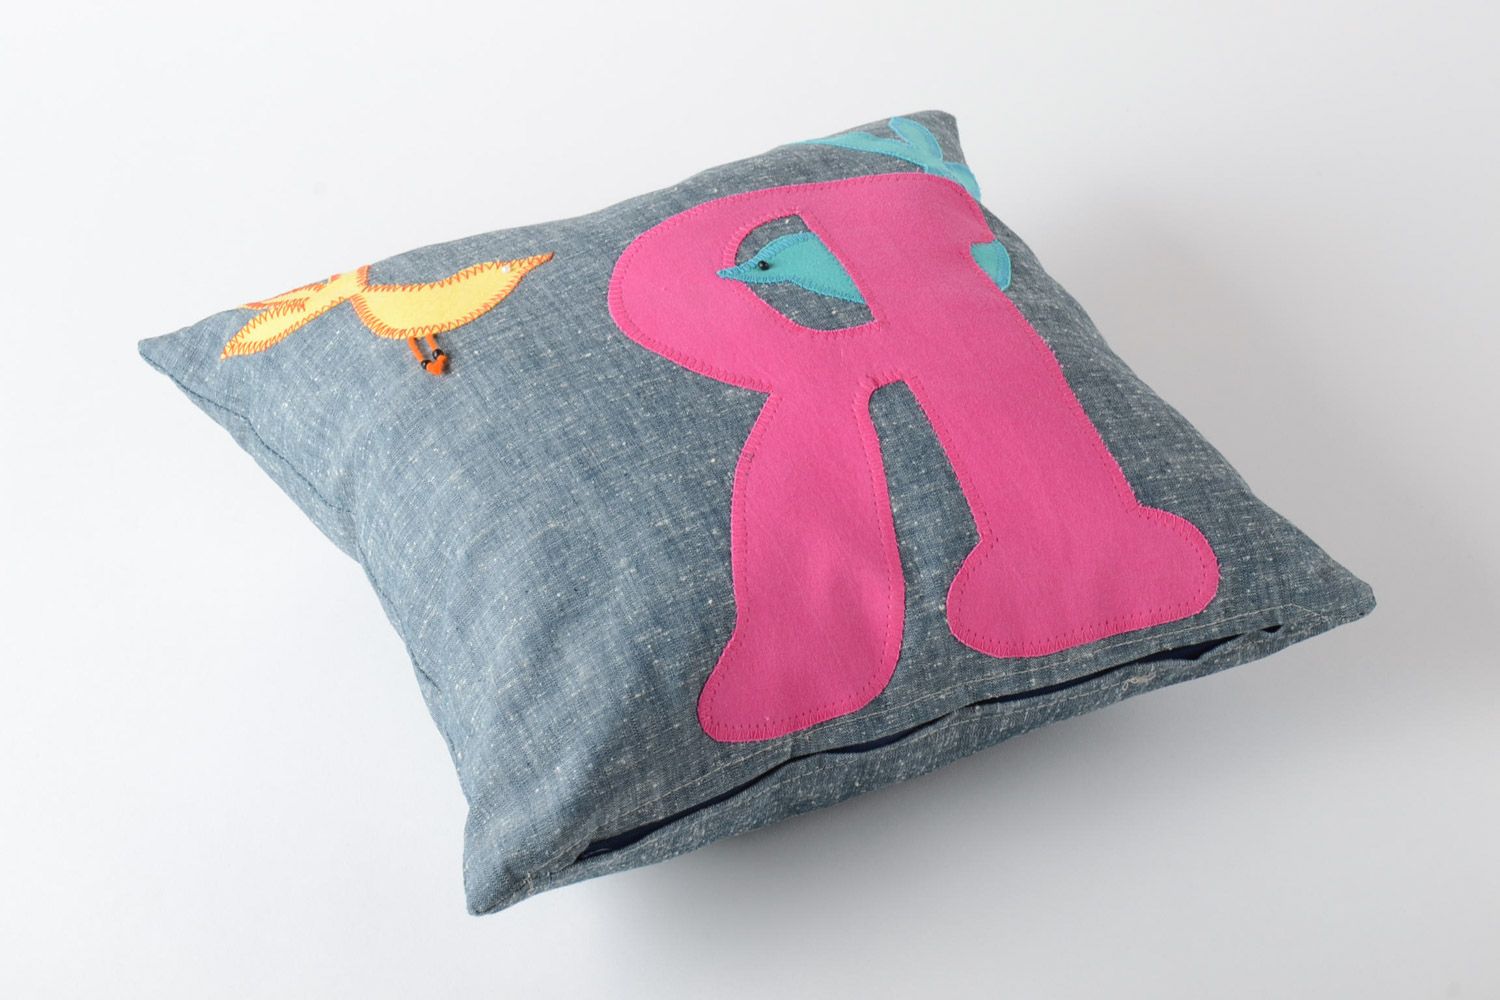 Handmade designer fabric cushion with removable pillowcase decorated with letter applique photo 2